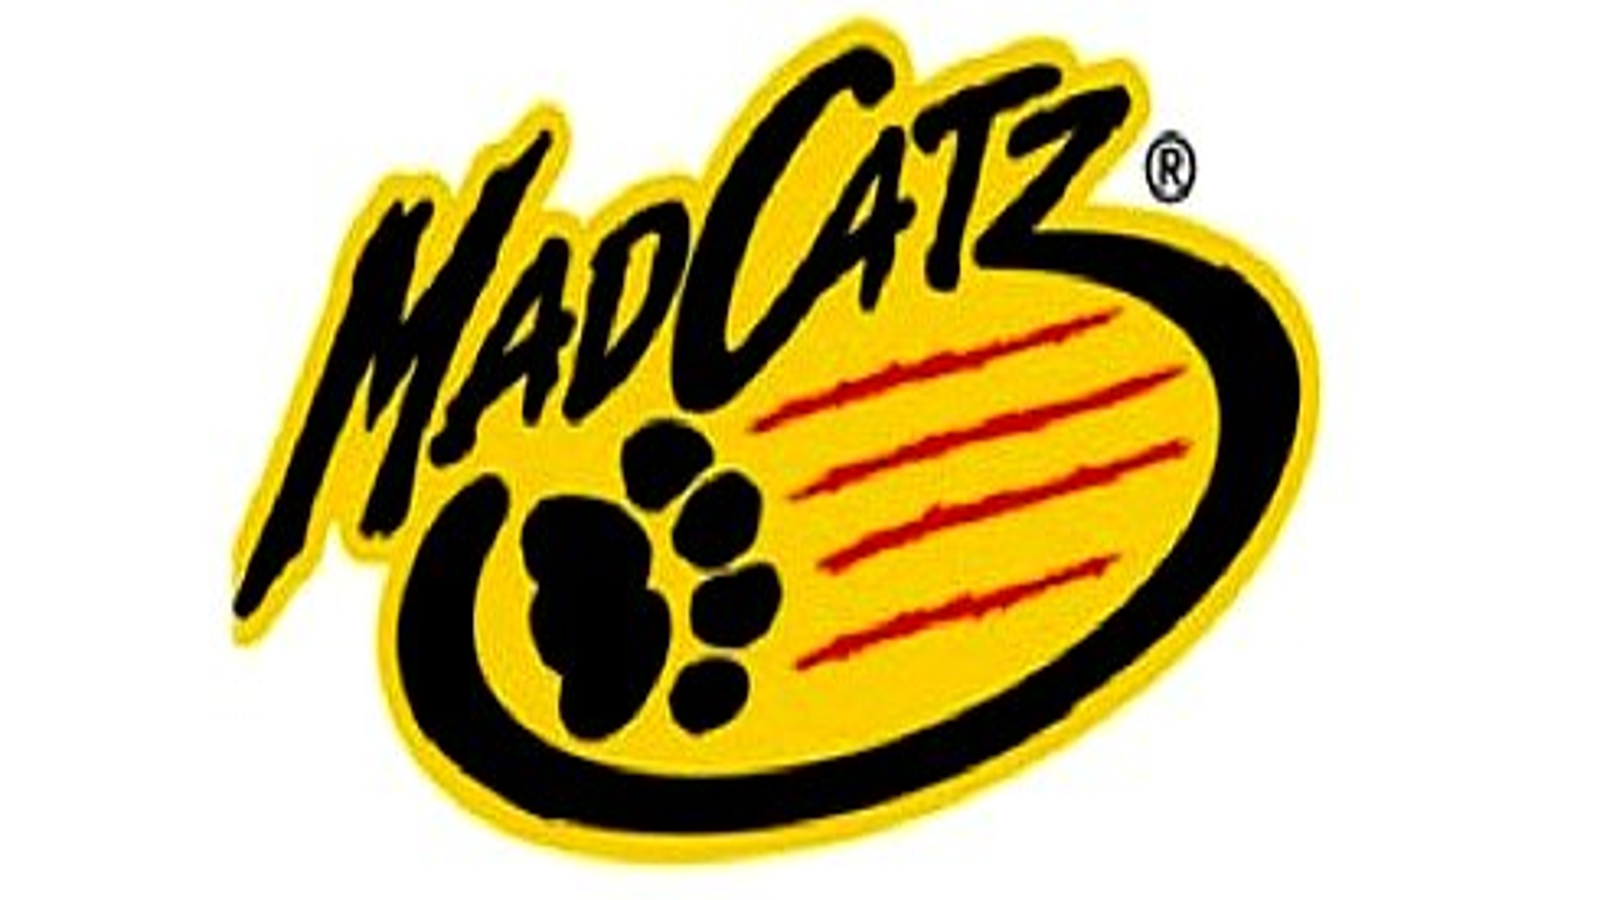  Madcatz Gameshark 2 for Playstation 2 : Video Games